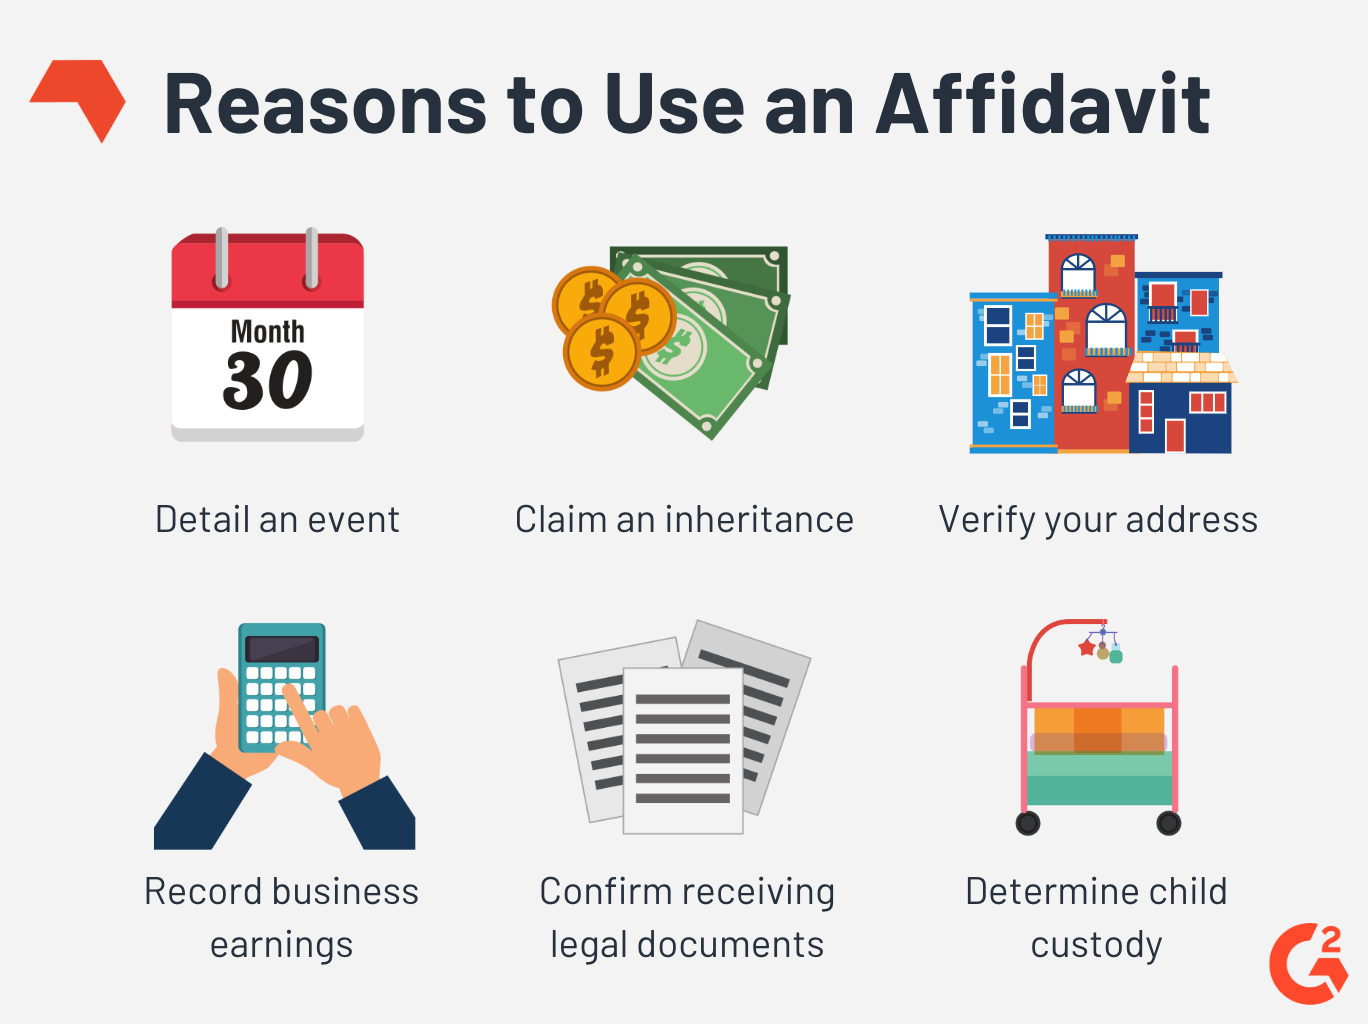 How to Write an Affidavit in 19 Simple Steps